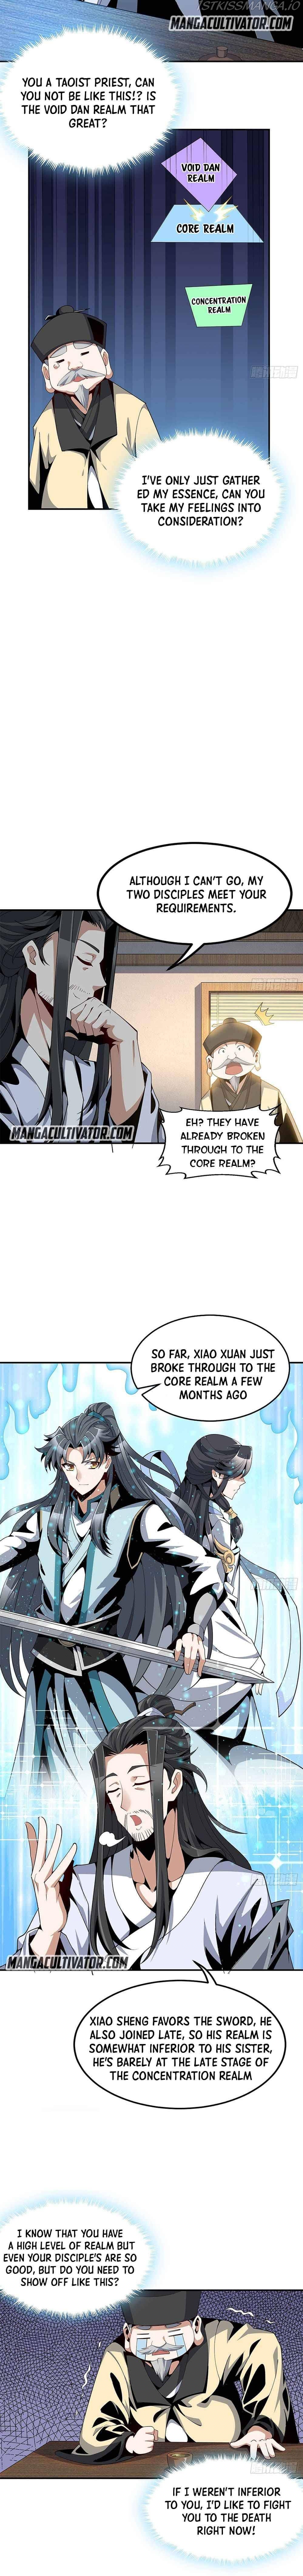 The First Sword Of Earth - Page 3